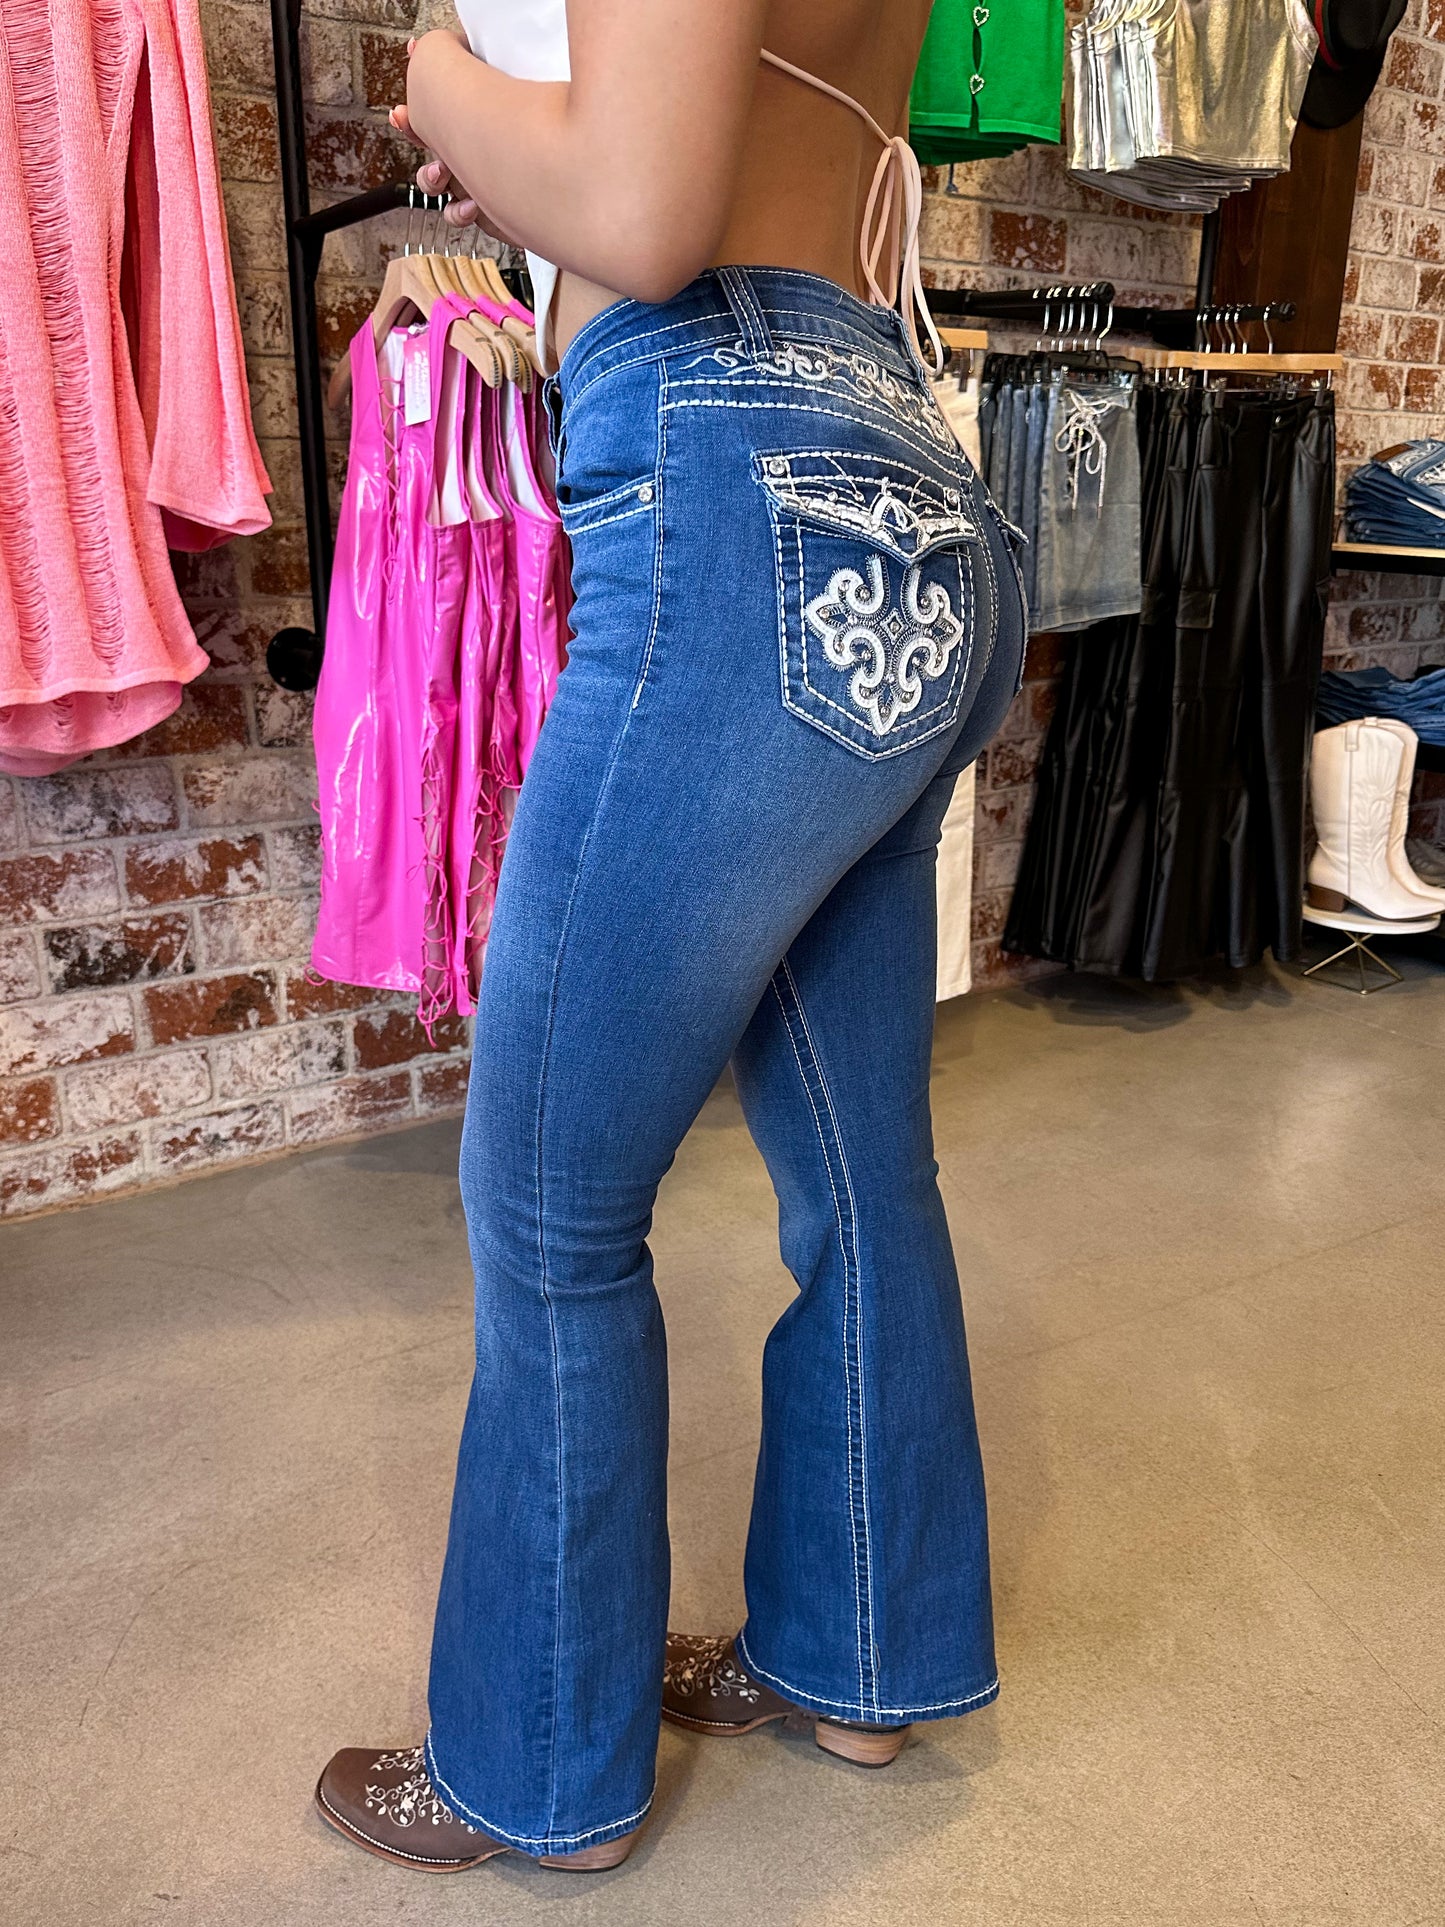 miss me jeans cowgirl